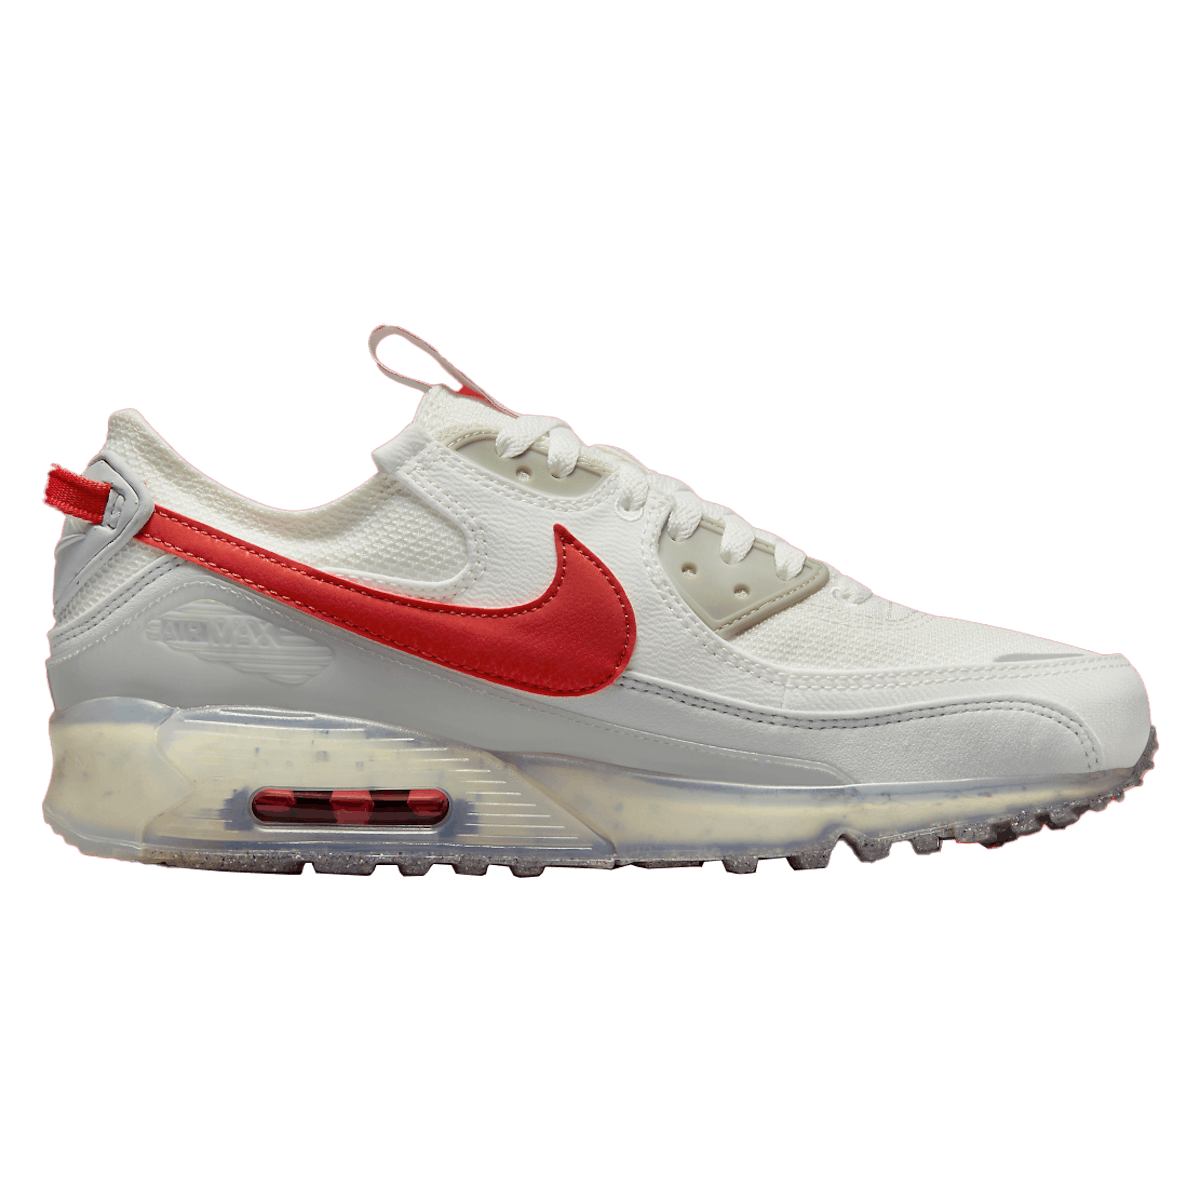 Nike Air Max 90 Terrascape "Off White/Red Clay"